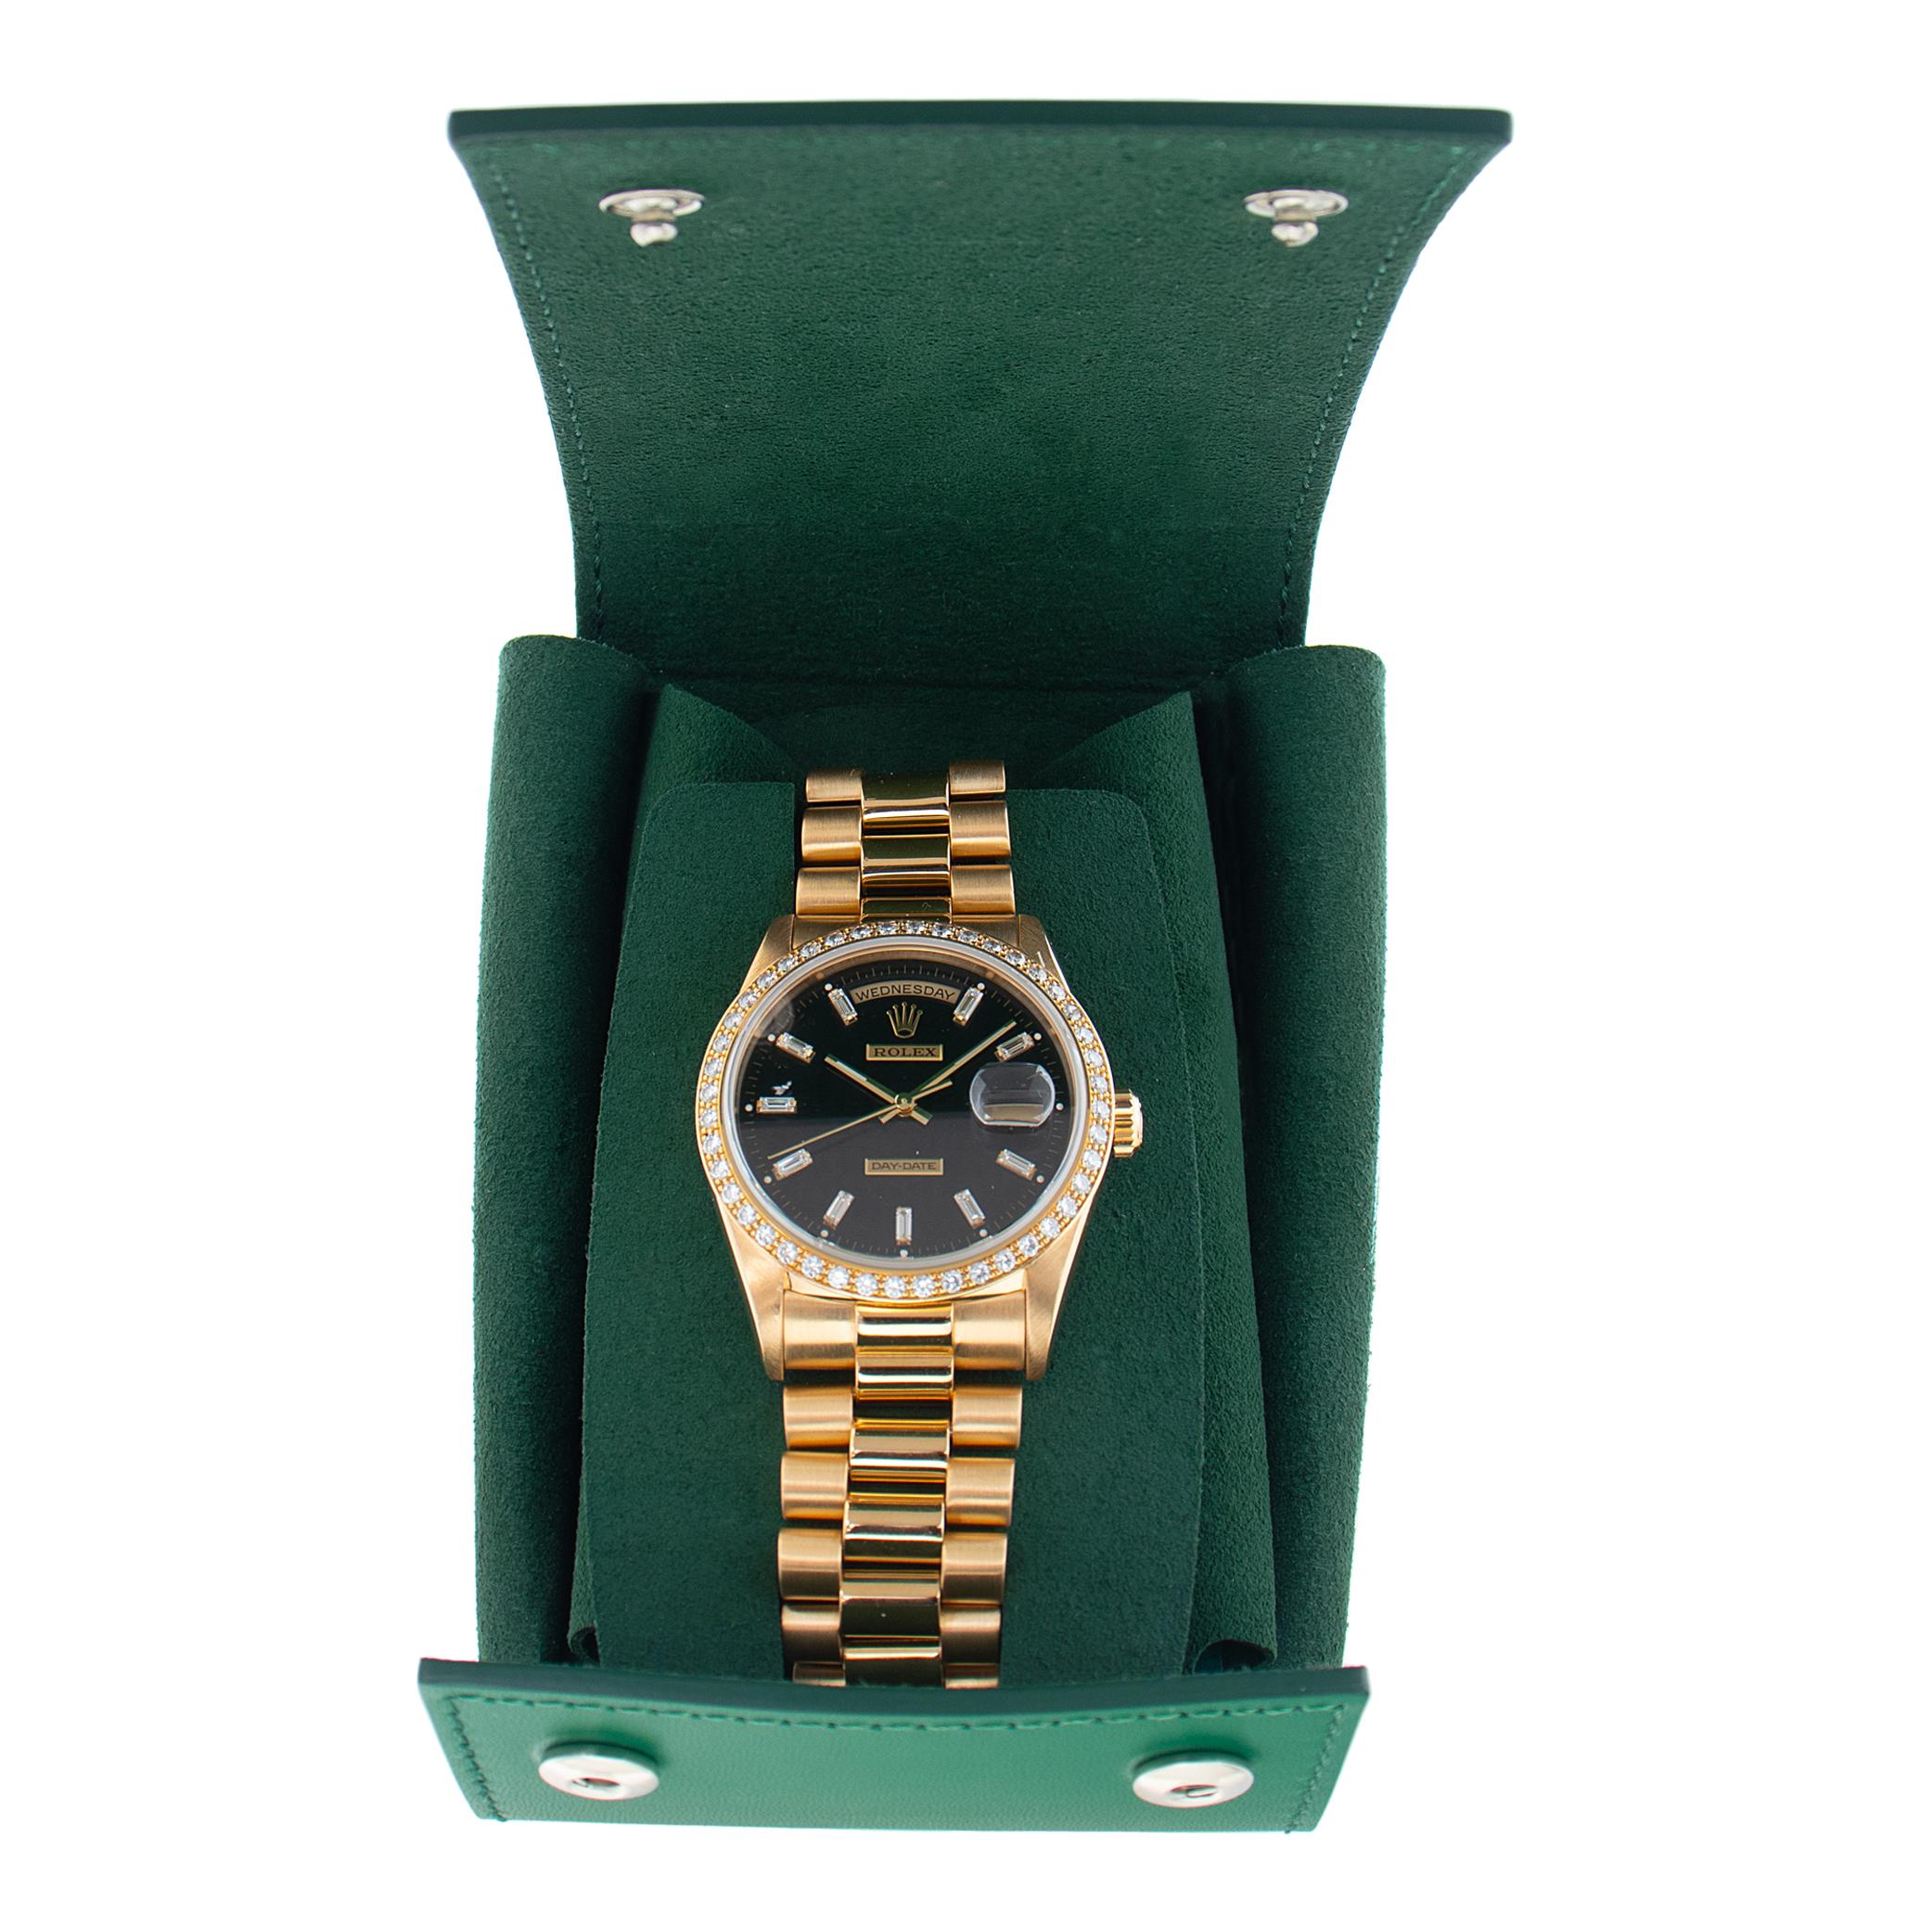 Rolex Day-Date 18k yellow gold Automatic Wristwatch Ref 18238 For Sale 1